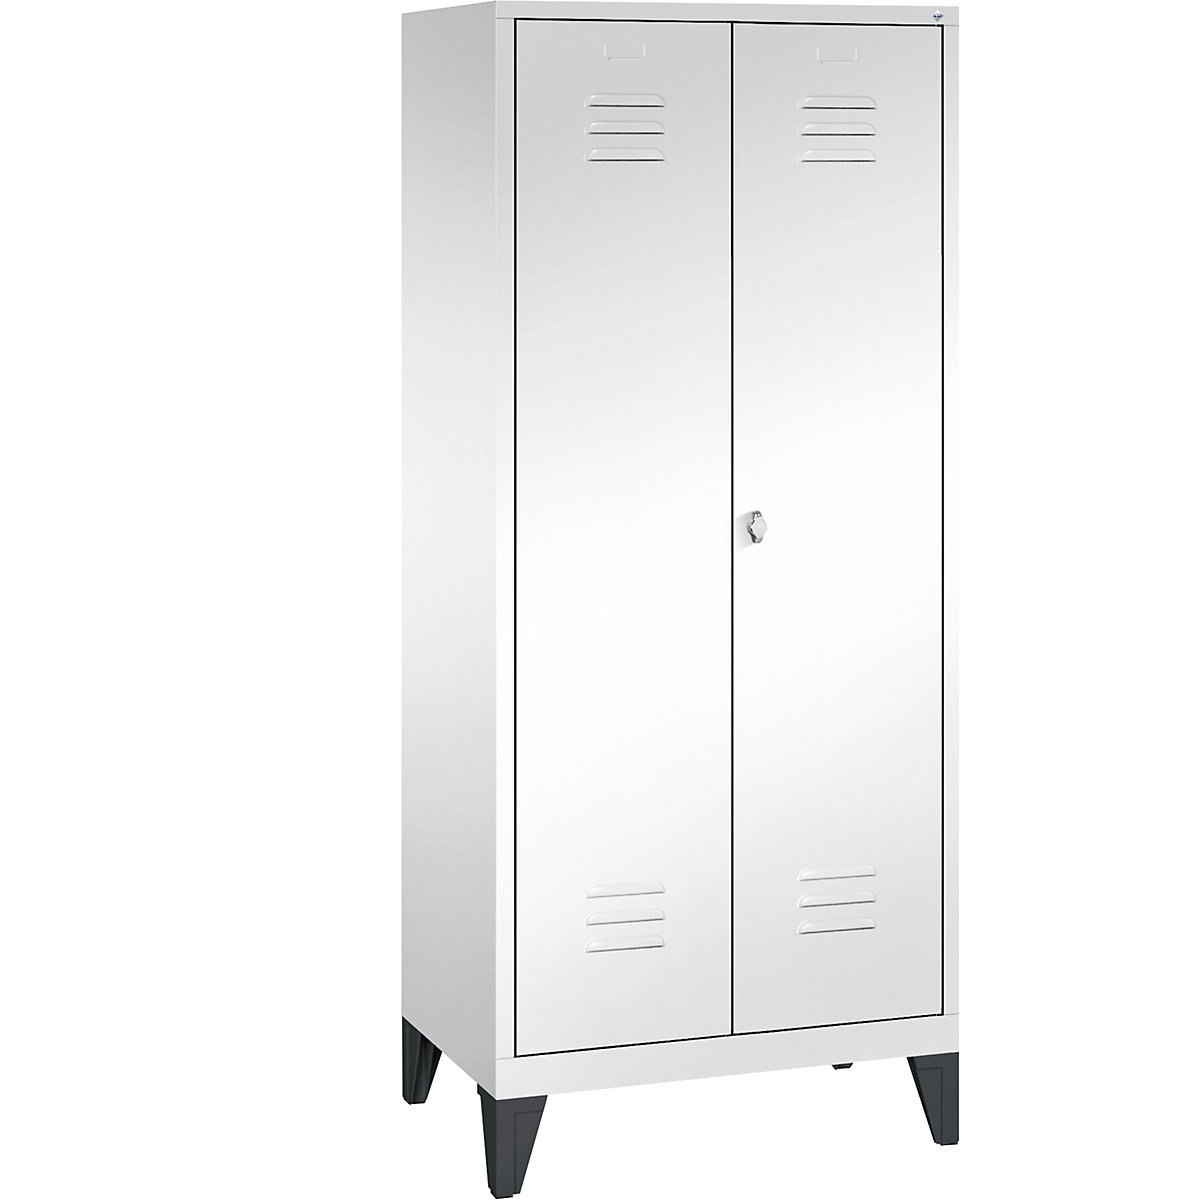 CLASSIC cloakroom locker with feet, doors close in the middle - C+P